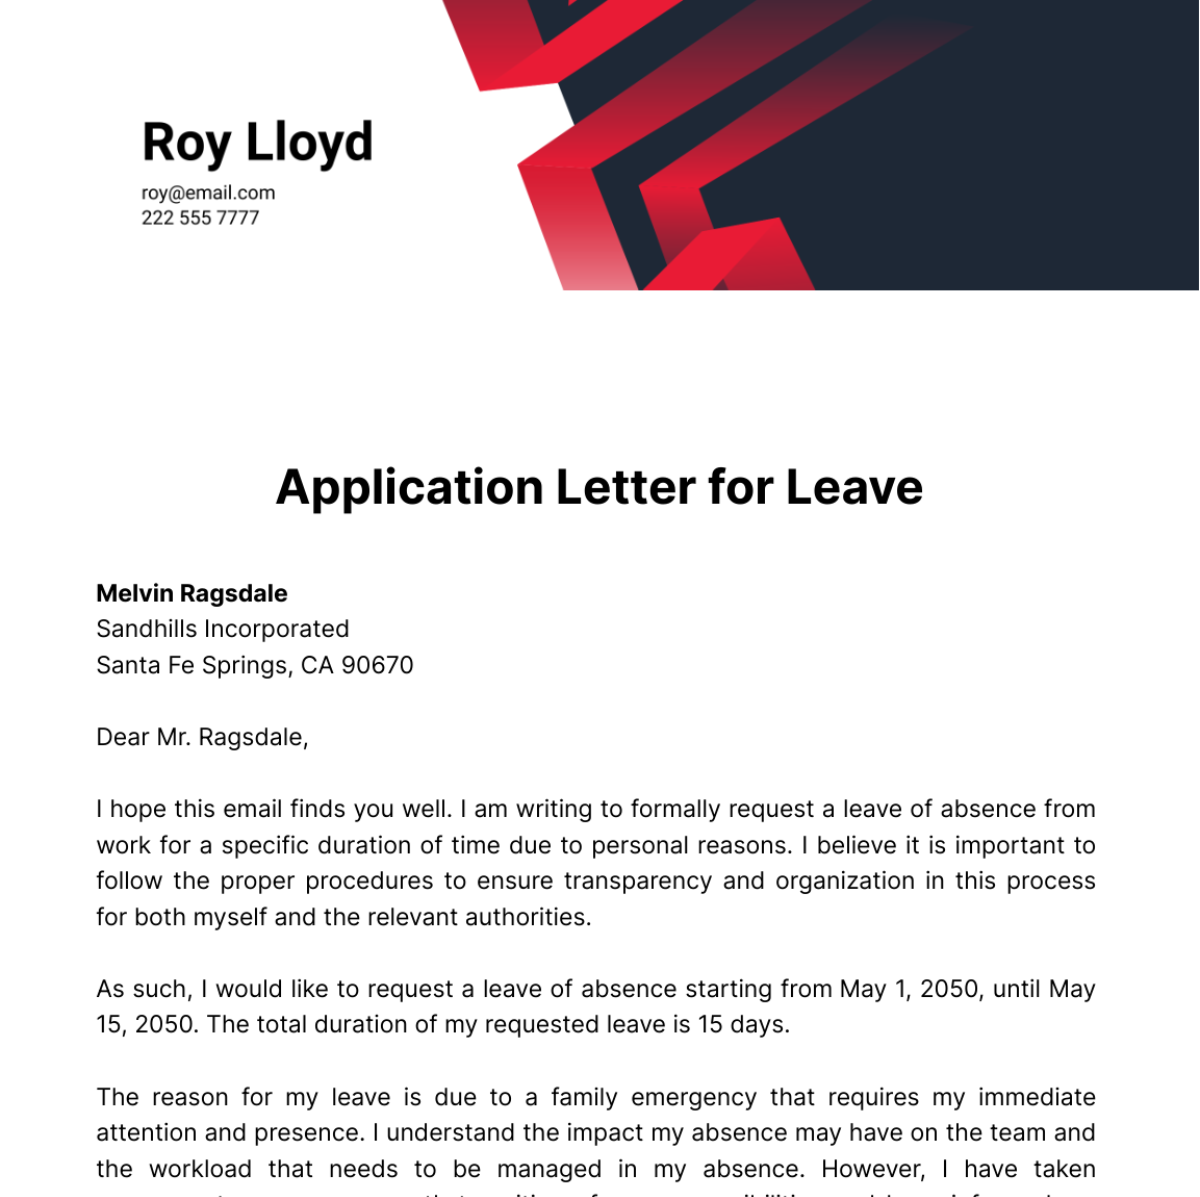 Application Letter for Leave  Template